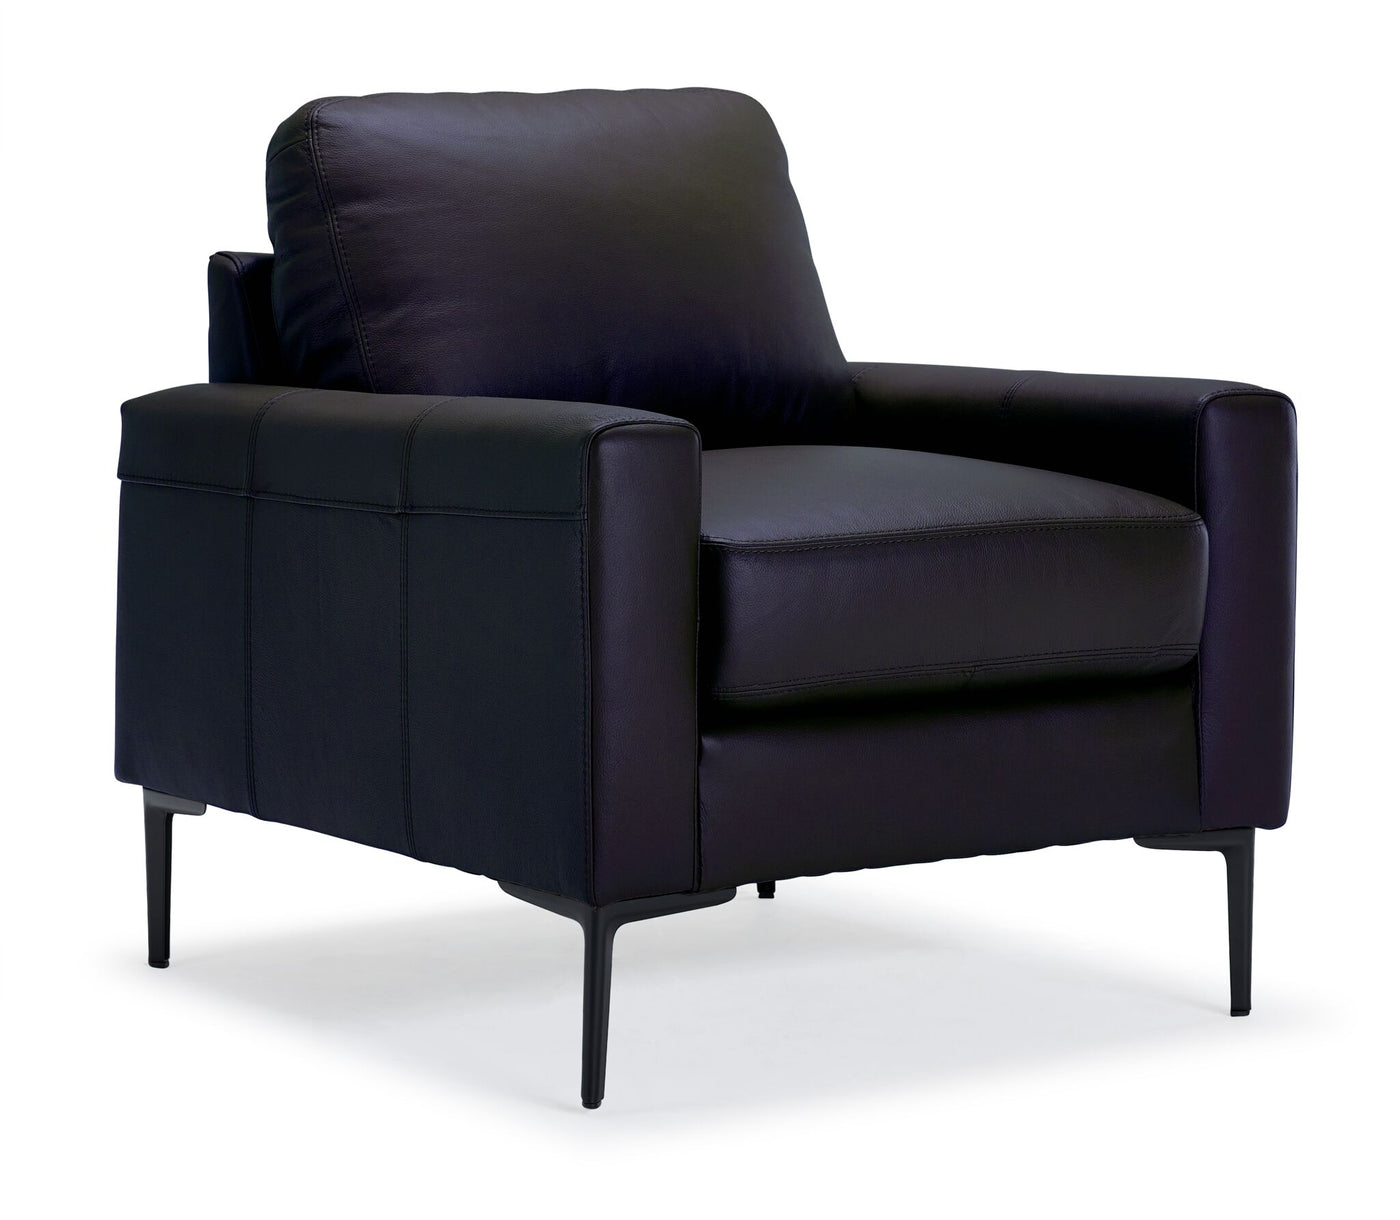 Chito Leather Sofa, Loveseat and Chair Set - Raven